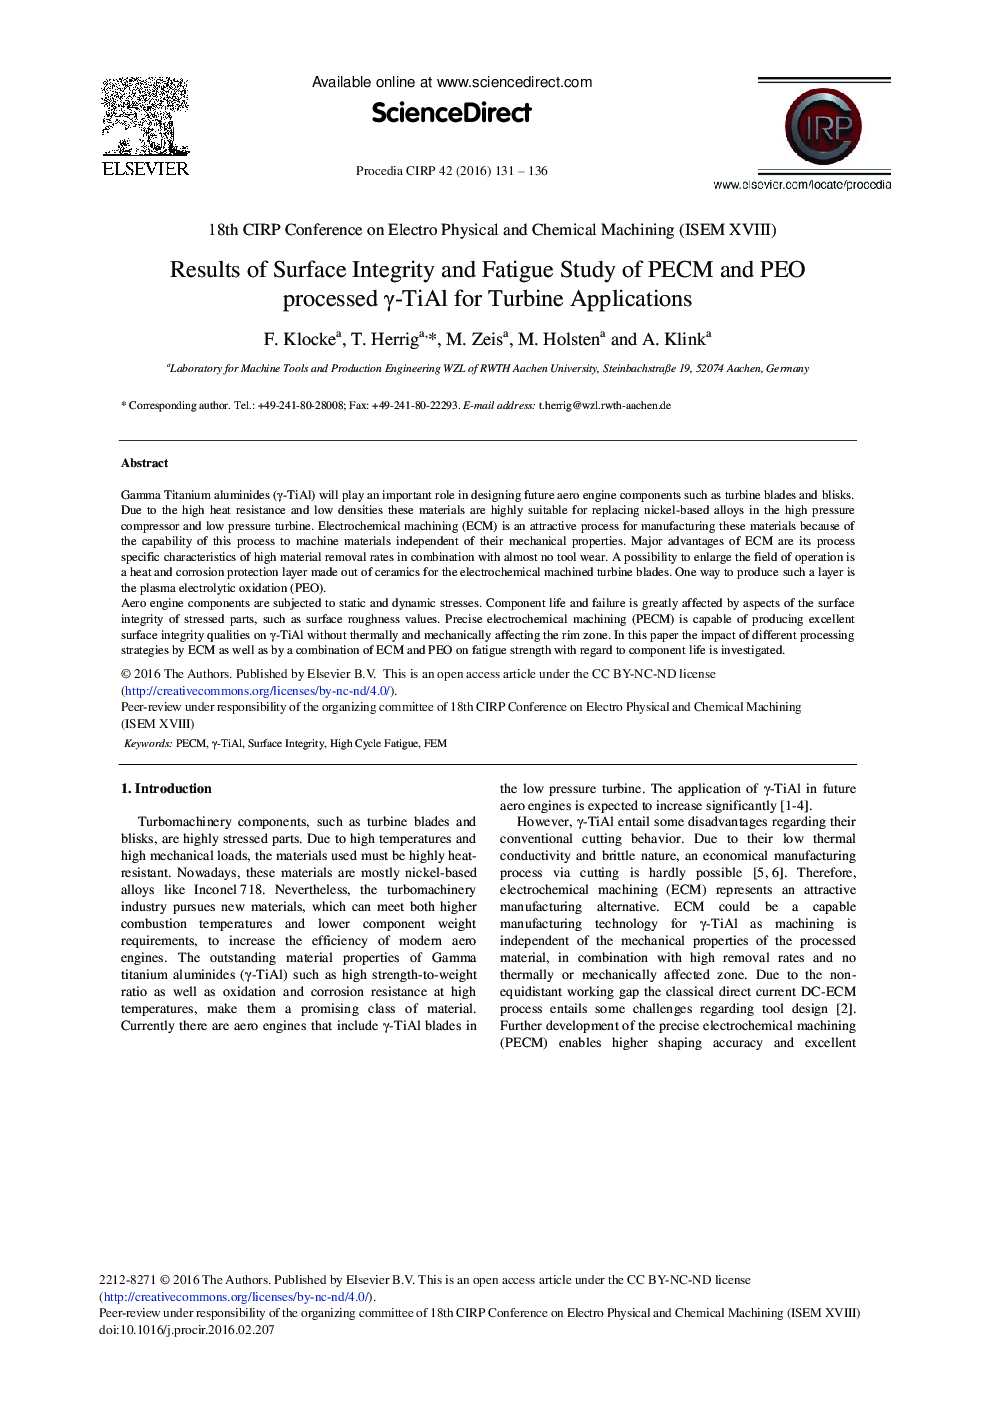 Results of Surface Integrity and Fatigue Study of PECM and PEO Processed γ-TiAl for Turbine Applications 